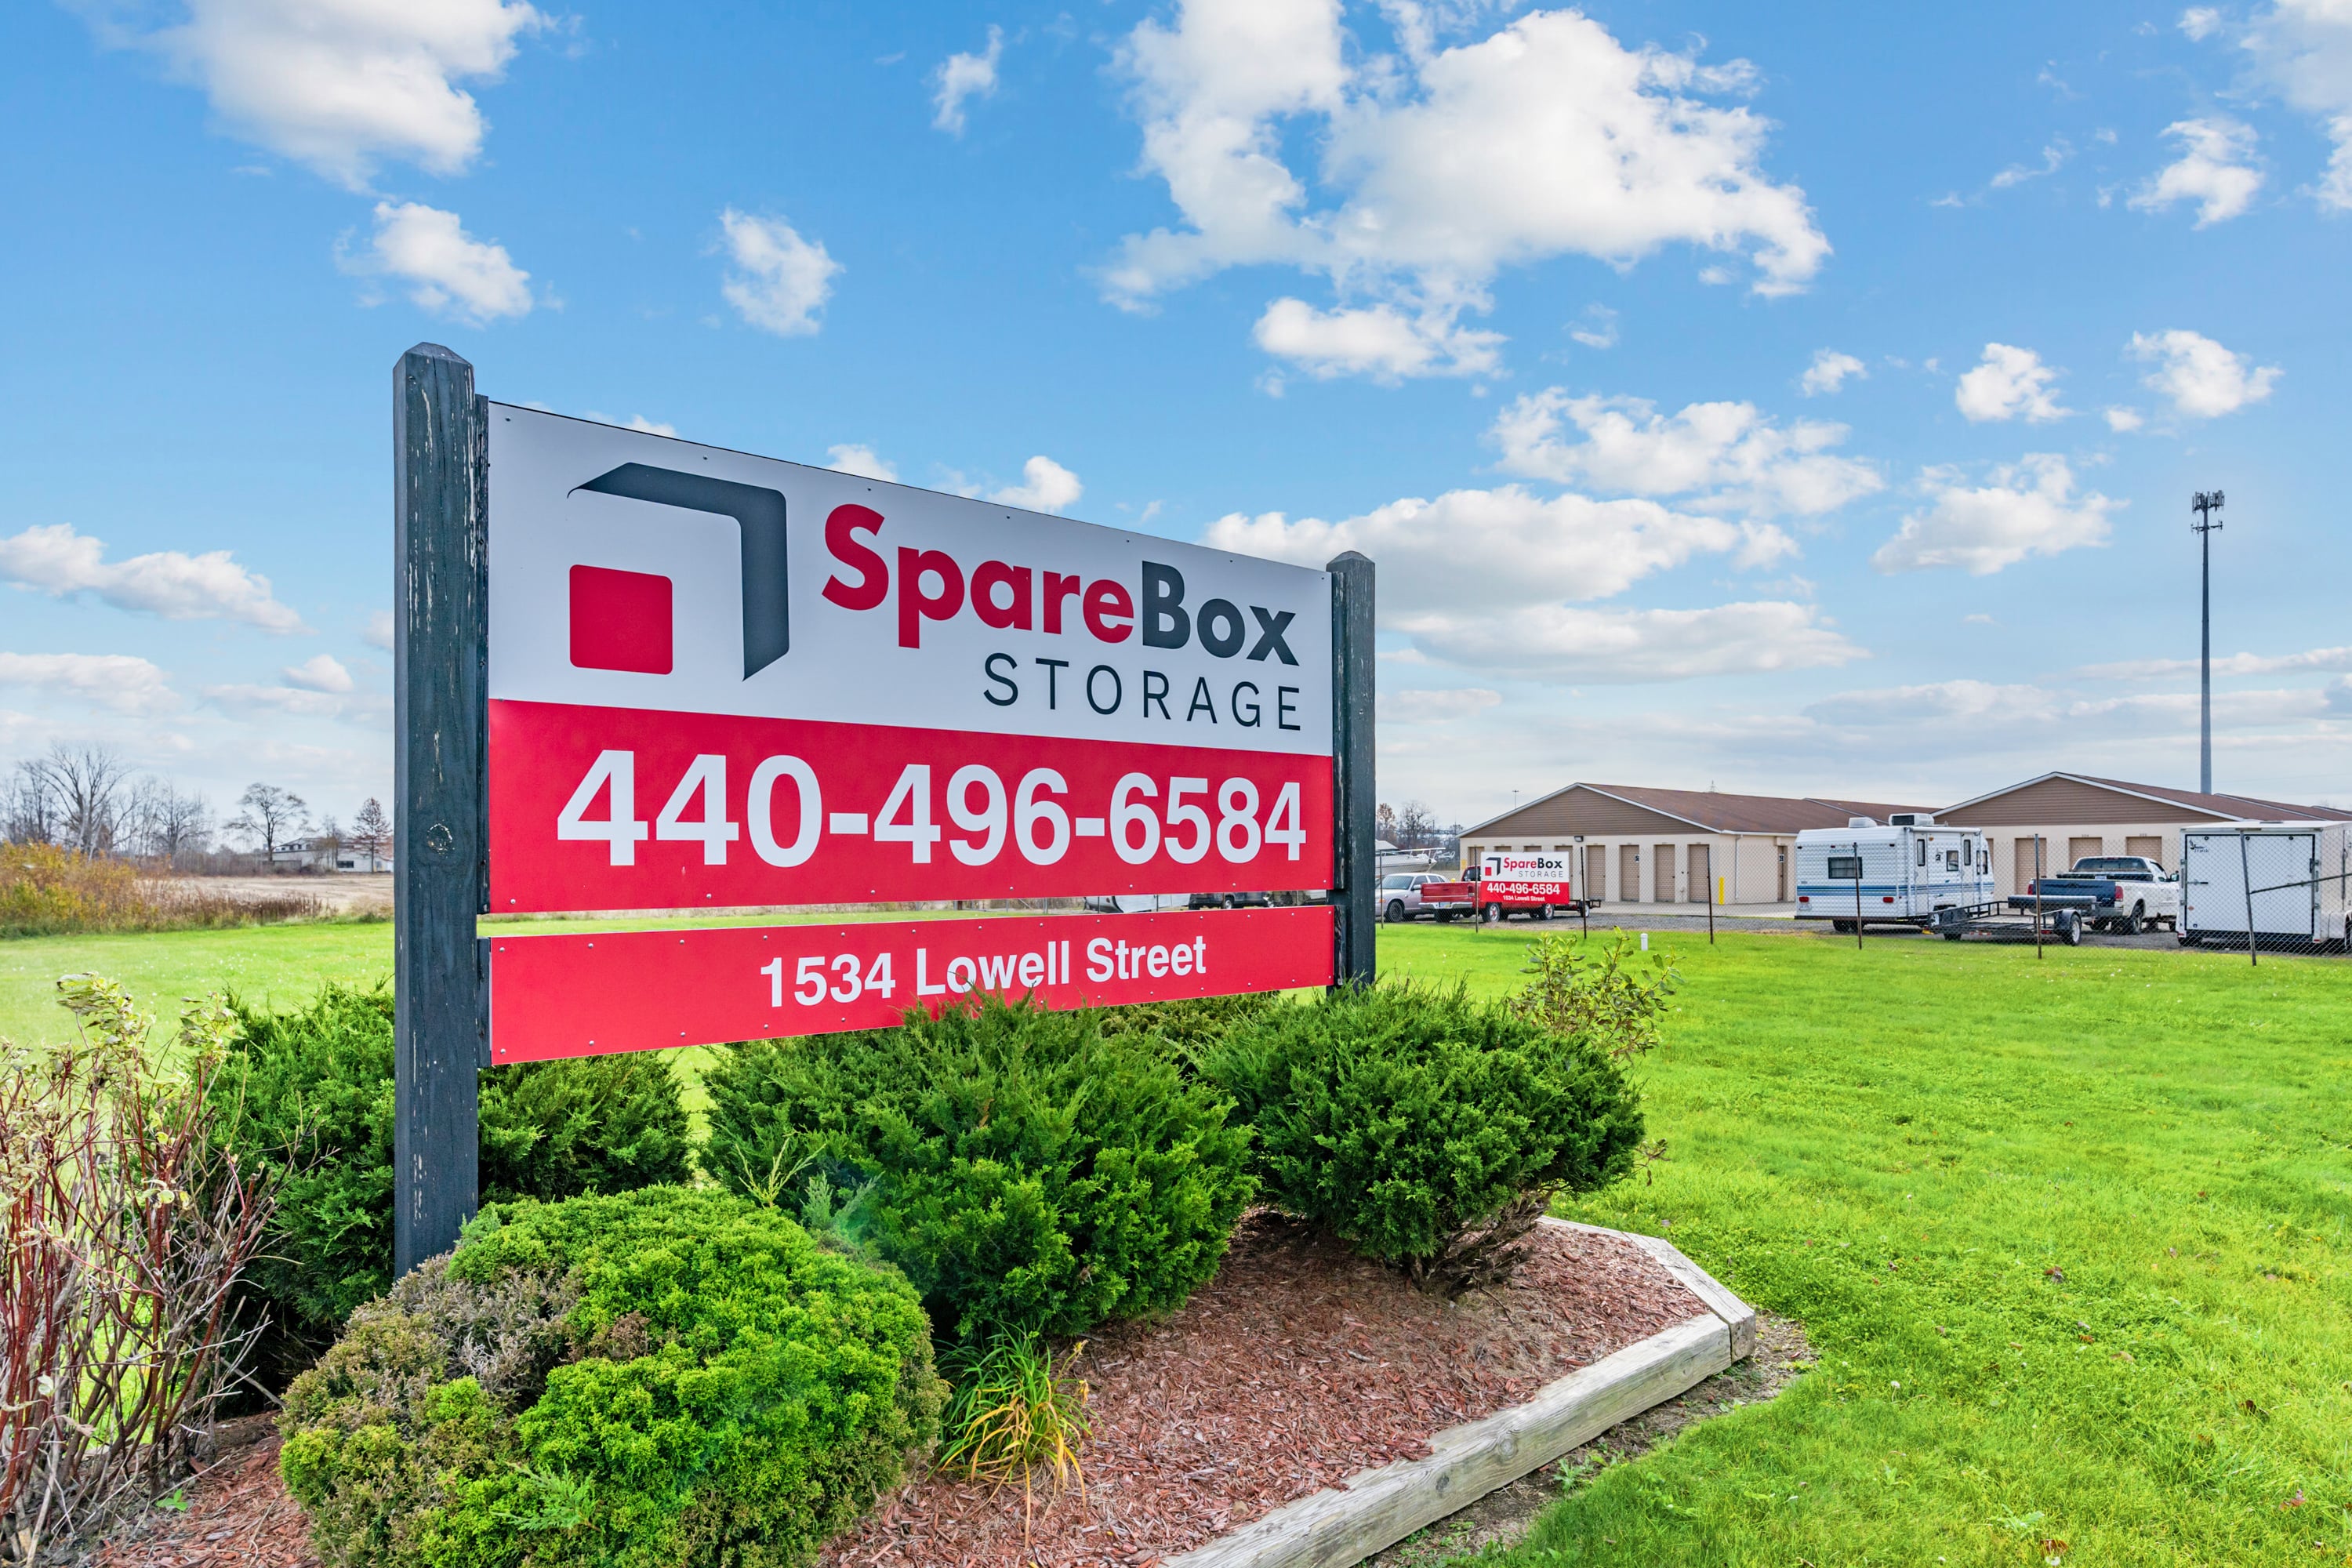 Meet all of your self storage needs in Elyria, Ohio at our Lowell St location | SpareBox Storage